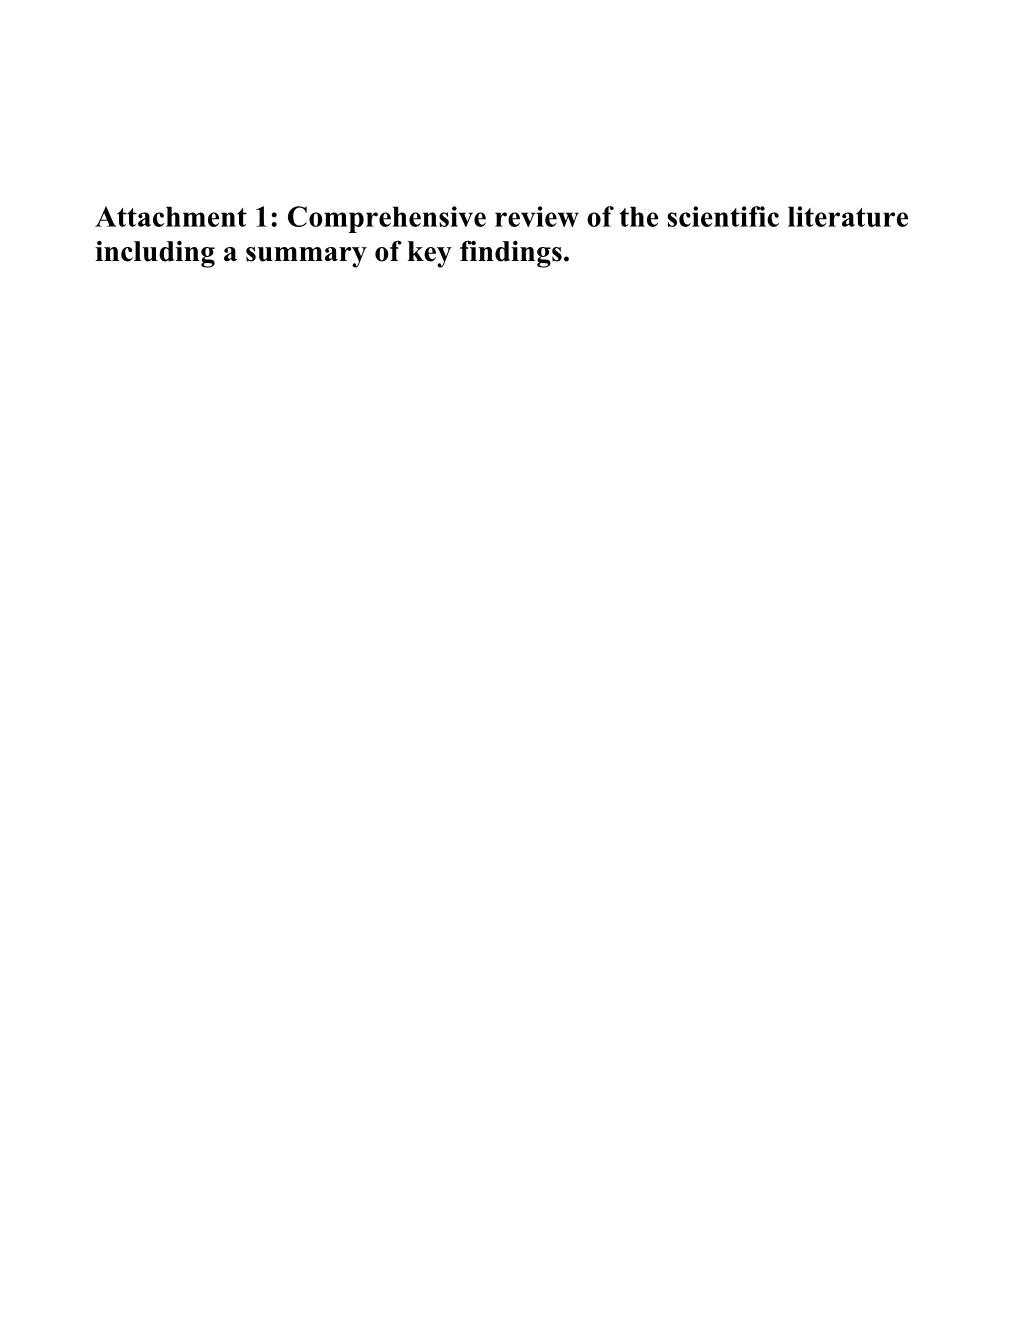 Comprehensive Review of the Scientific Literature Including a Summary of Key Findings